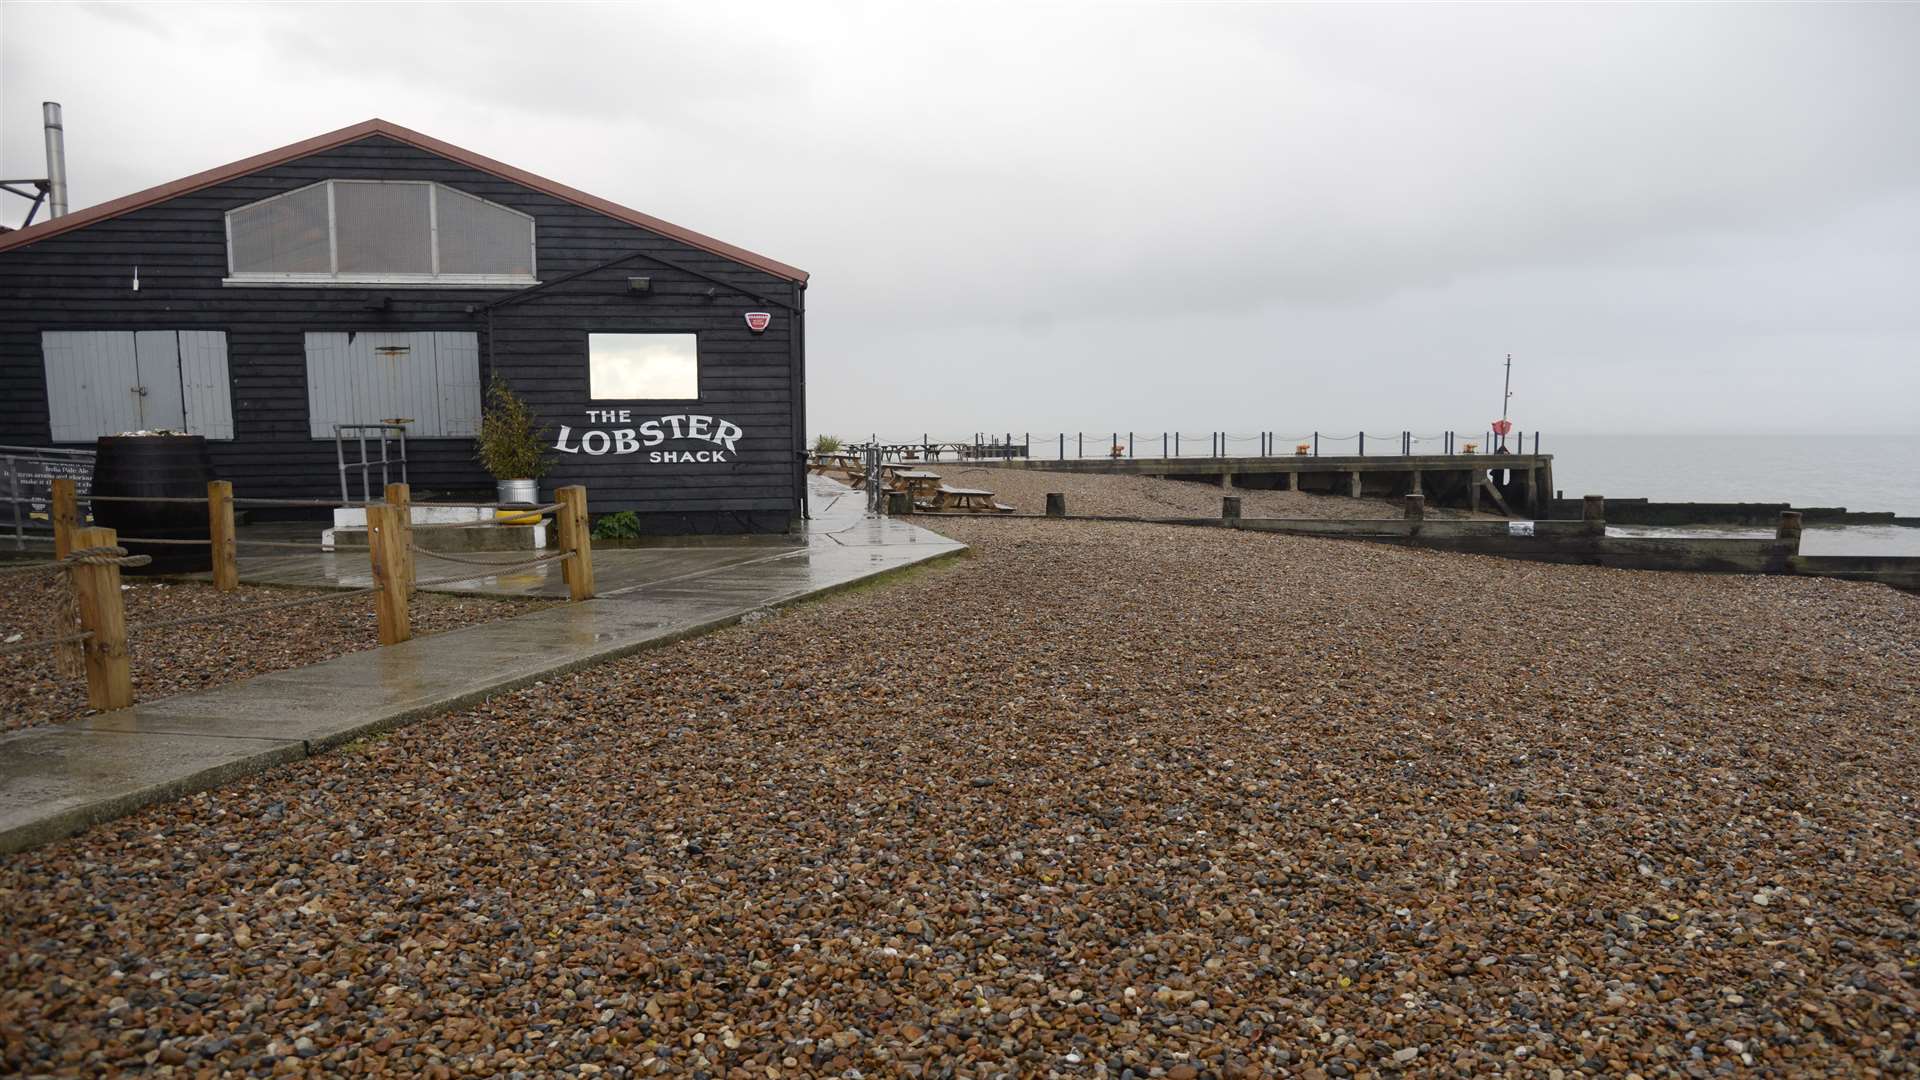 The East Quay Venue is one of the oldest buildings in Whitstable.